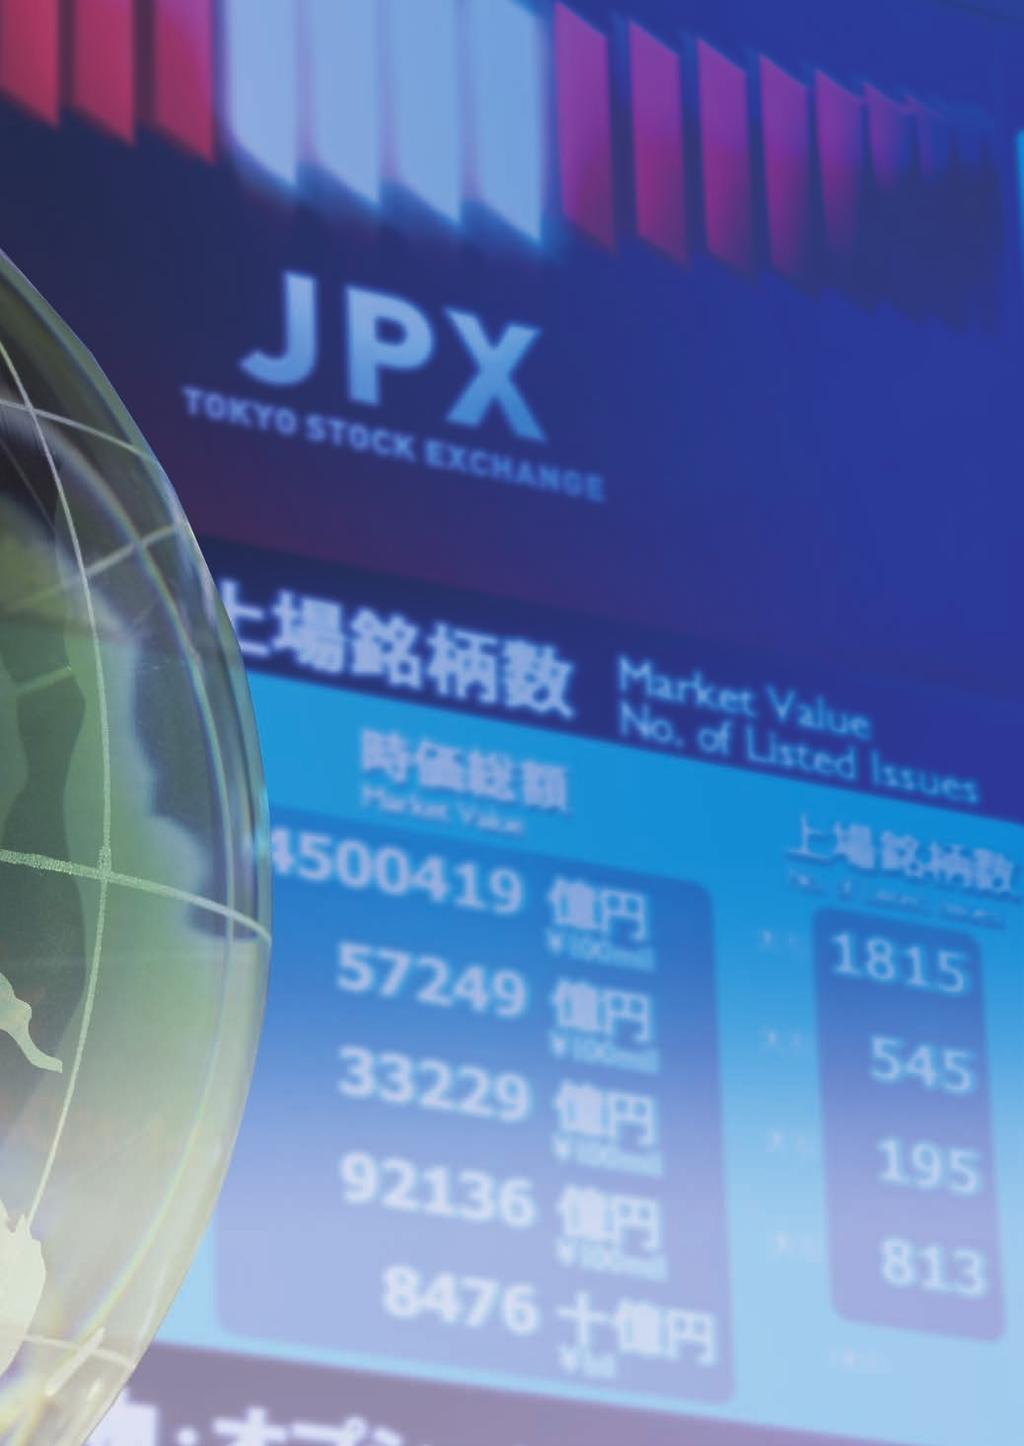 STEP UP TO THE NEXT About JPX Increasing Corporate Value ESG Financial Data/Corporate Data Disclaimer These materials are prepared solely for the purpose of providing information regarding Japan